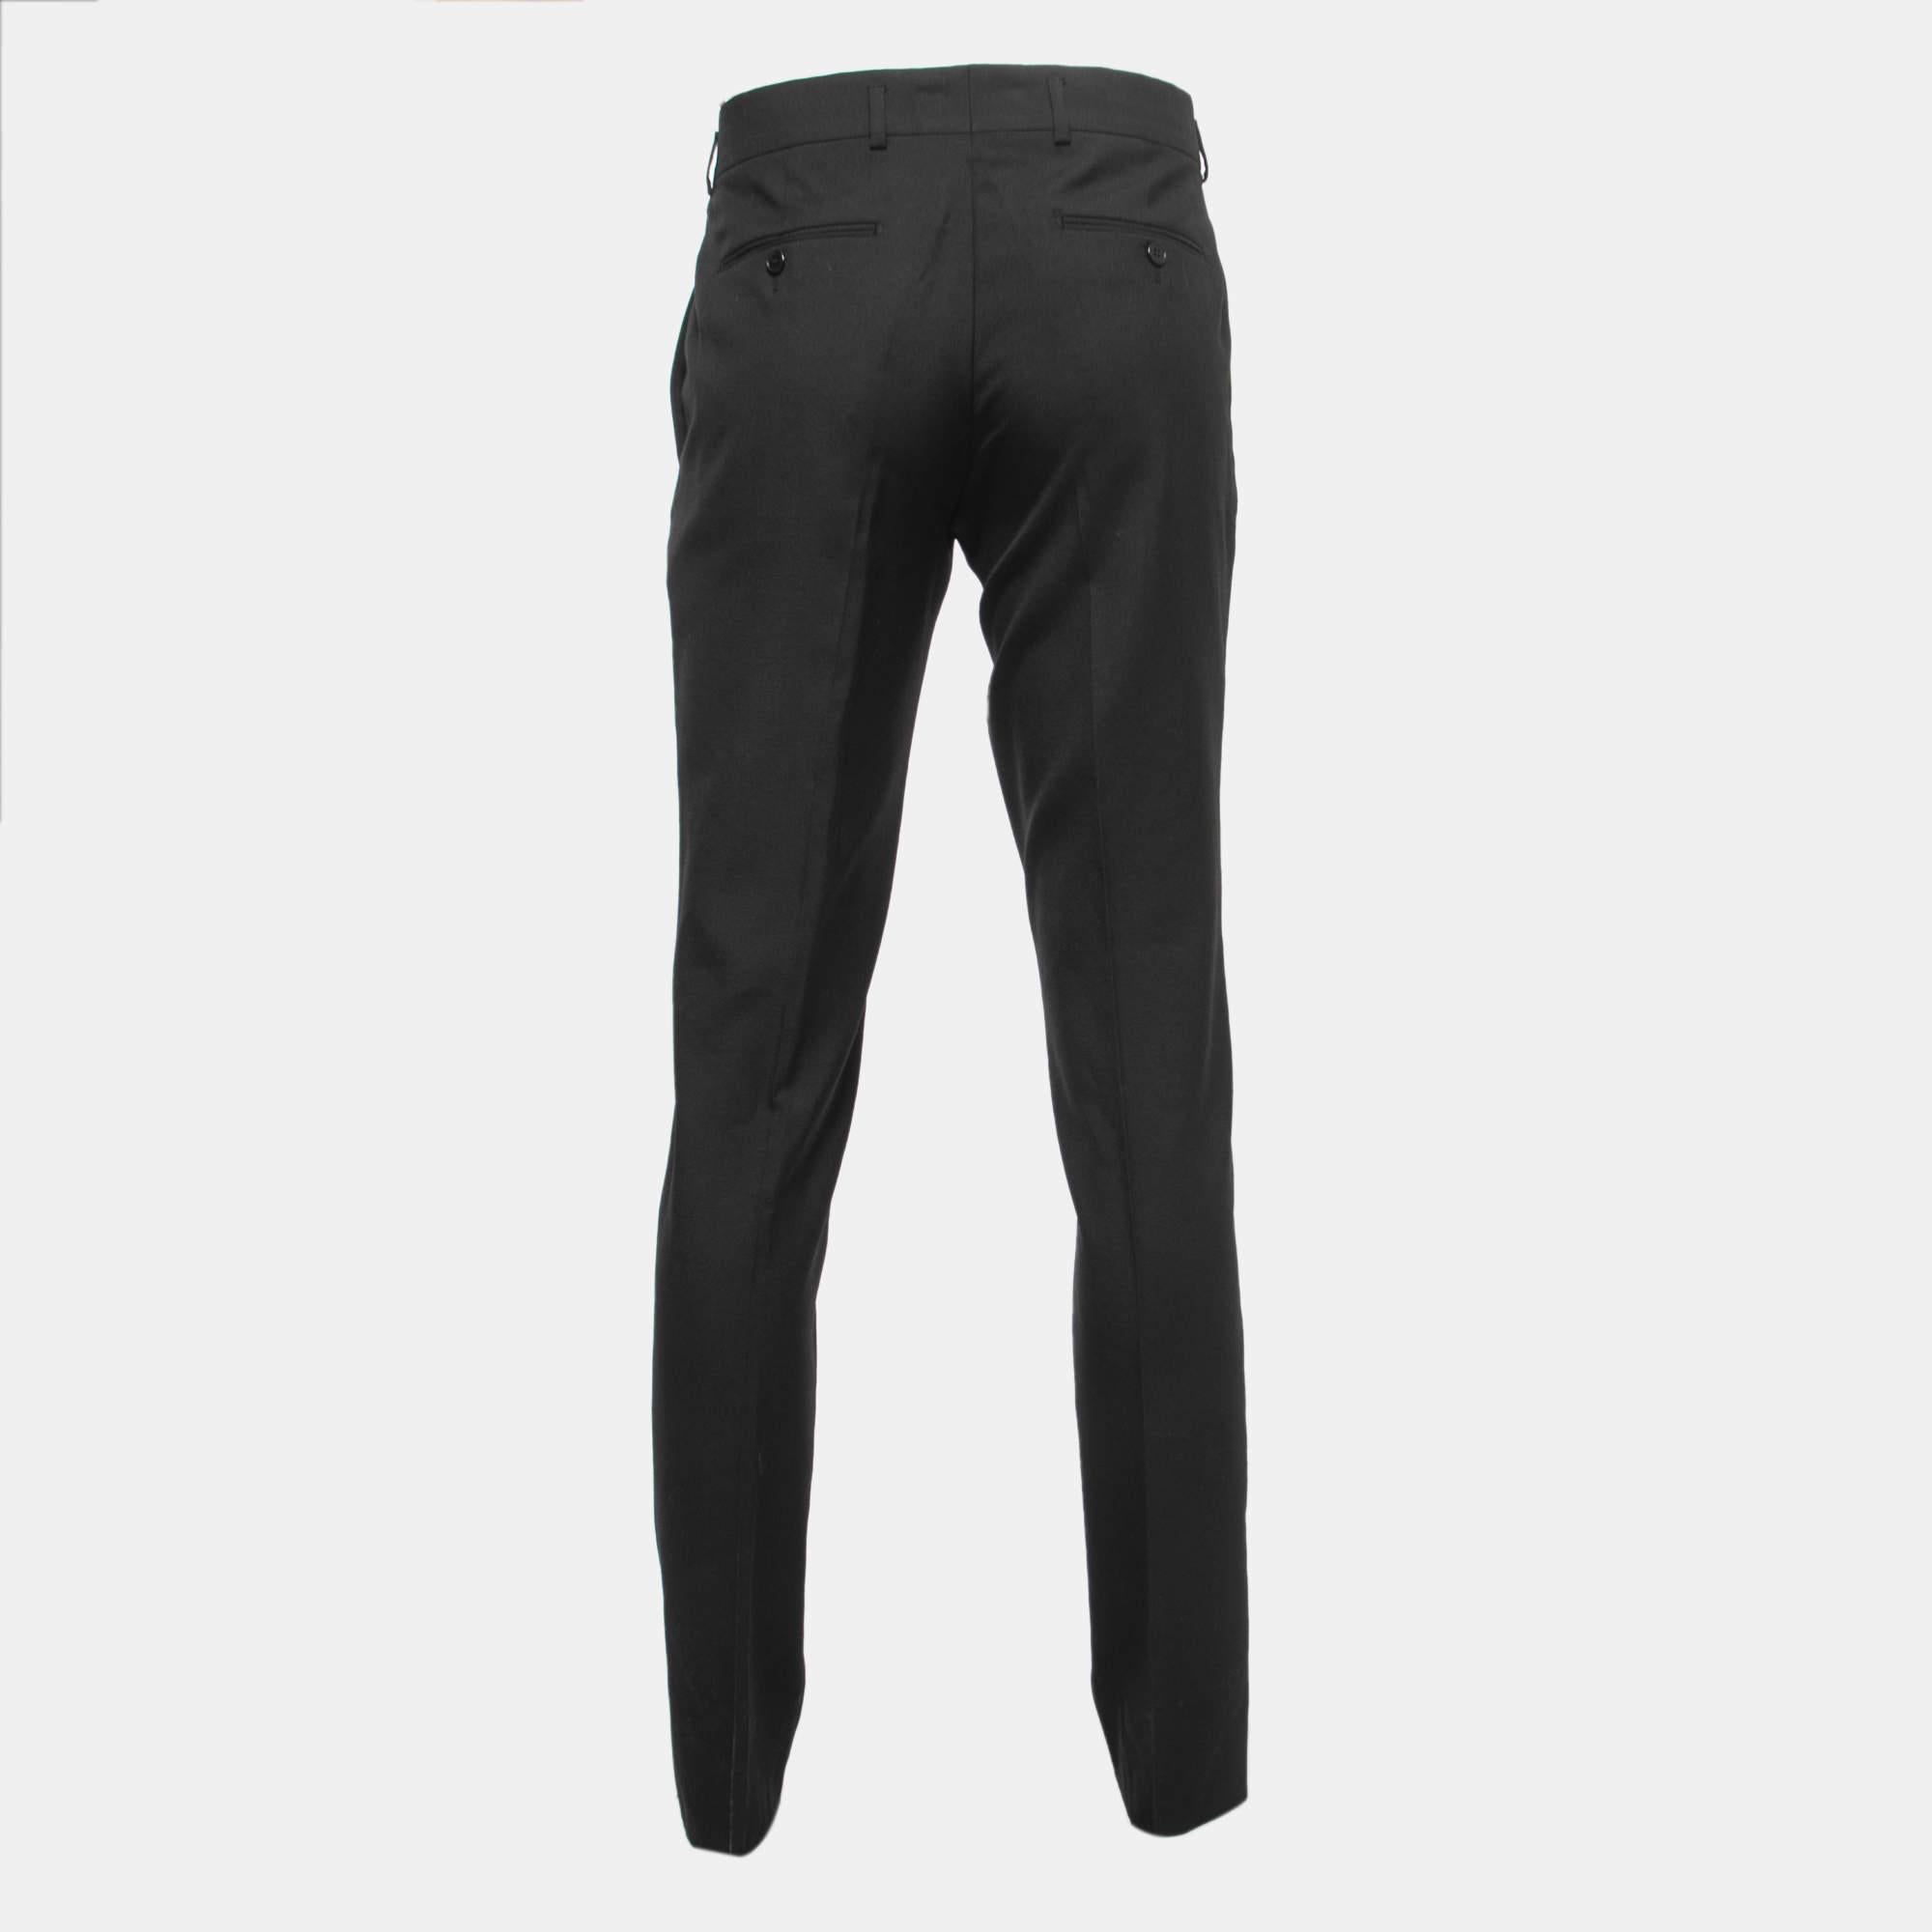 Enhance your formal attire with this pair of Saint Laurent trousers. Designed into a superb silhouette and fit, this pair of trousers will definitely make you look elegant.

